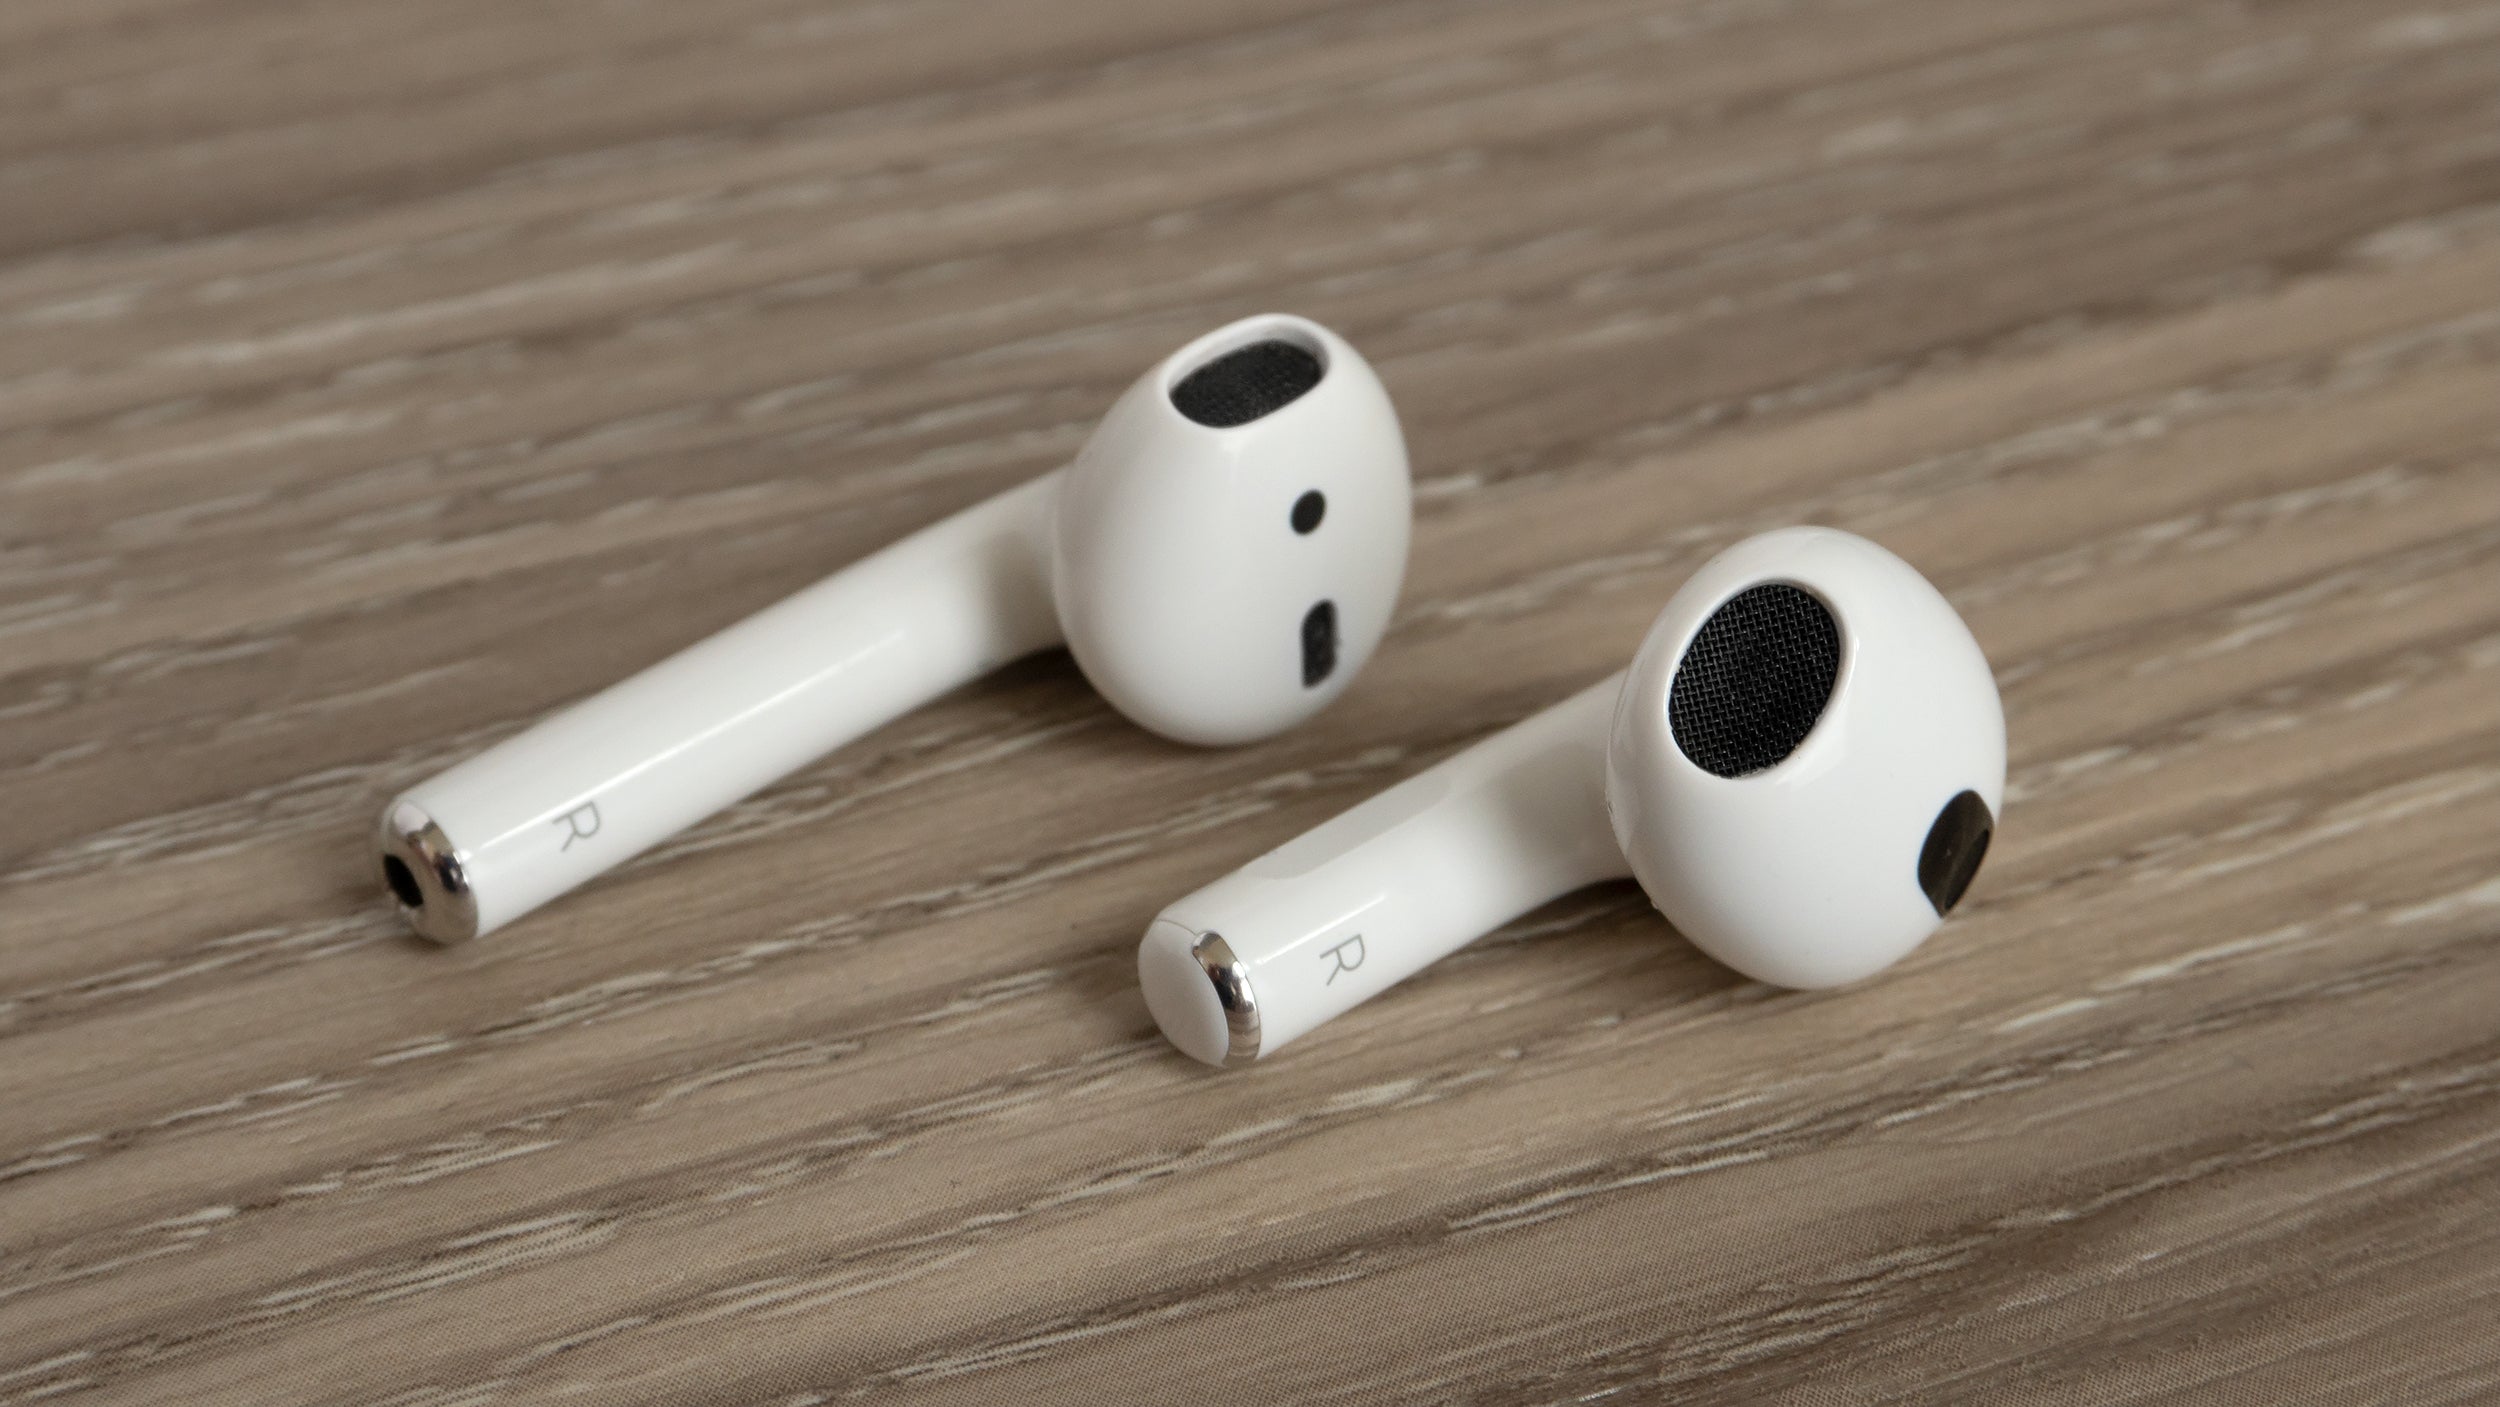 The new AirPods (right) have a more contoured design that also sits in the ear at a better angle than the second-gen AirPods (left) do. (Photo: Andrew Liszewski - Gizmodo)